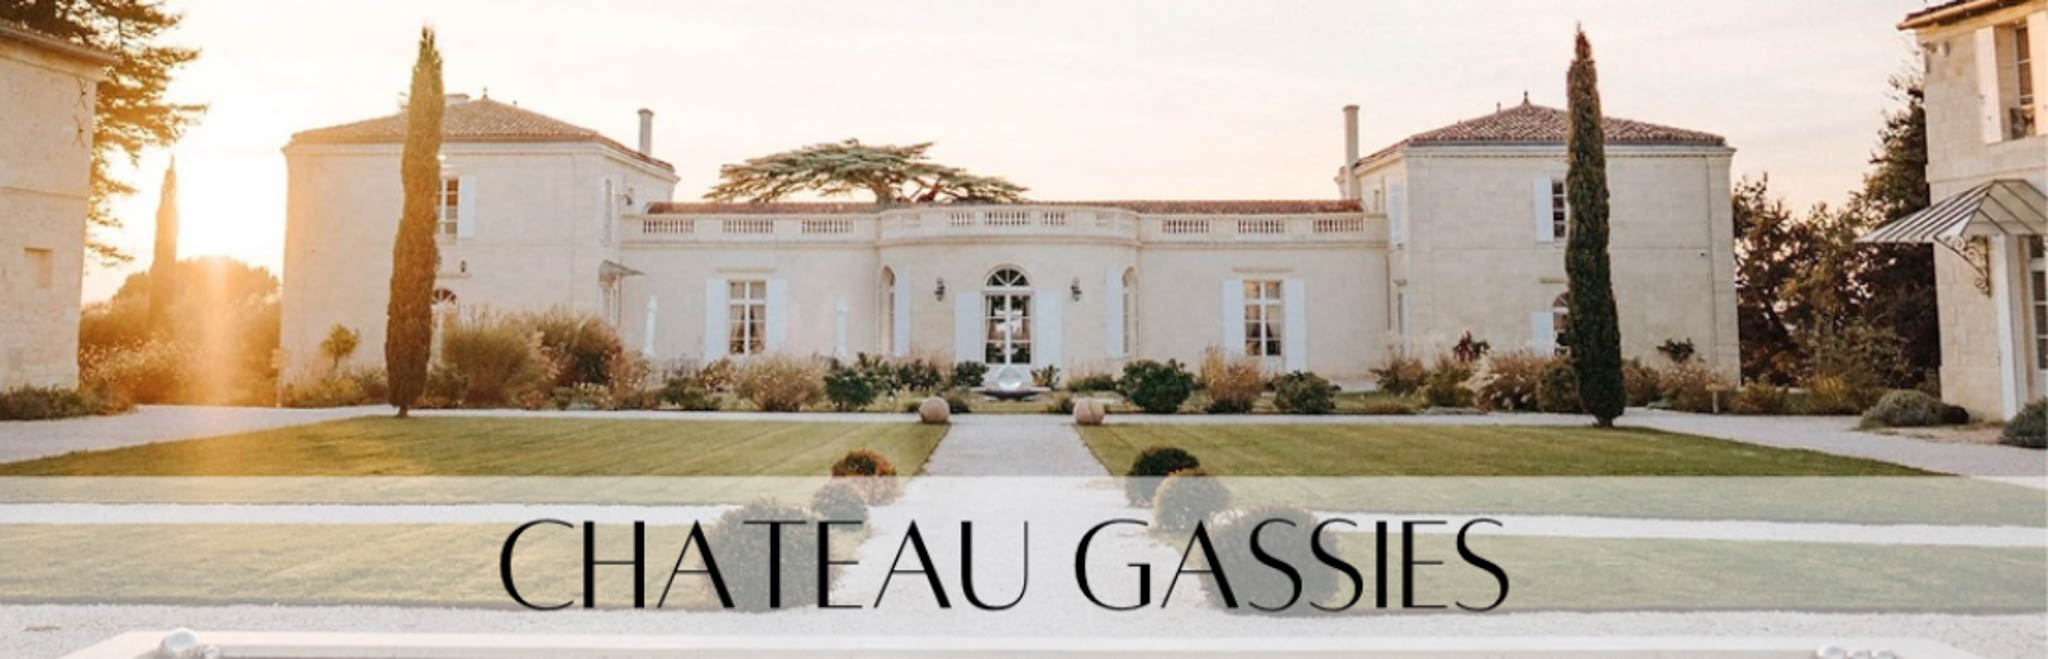 Mar/ Apr/ May – Tier 2 Top Chateau Gassies